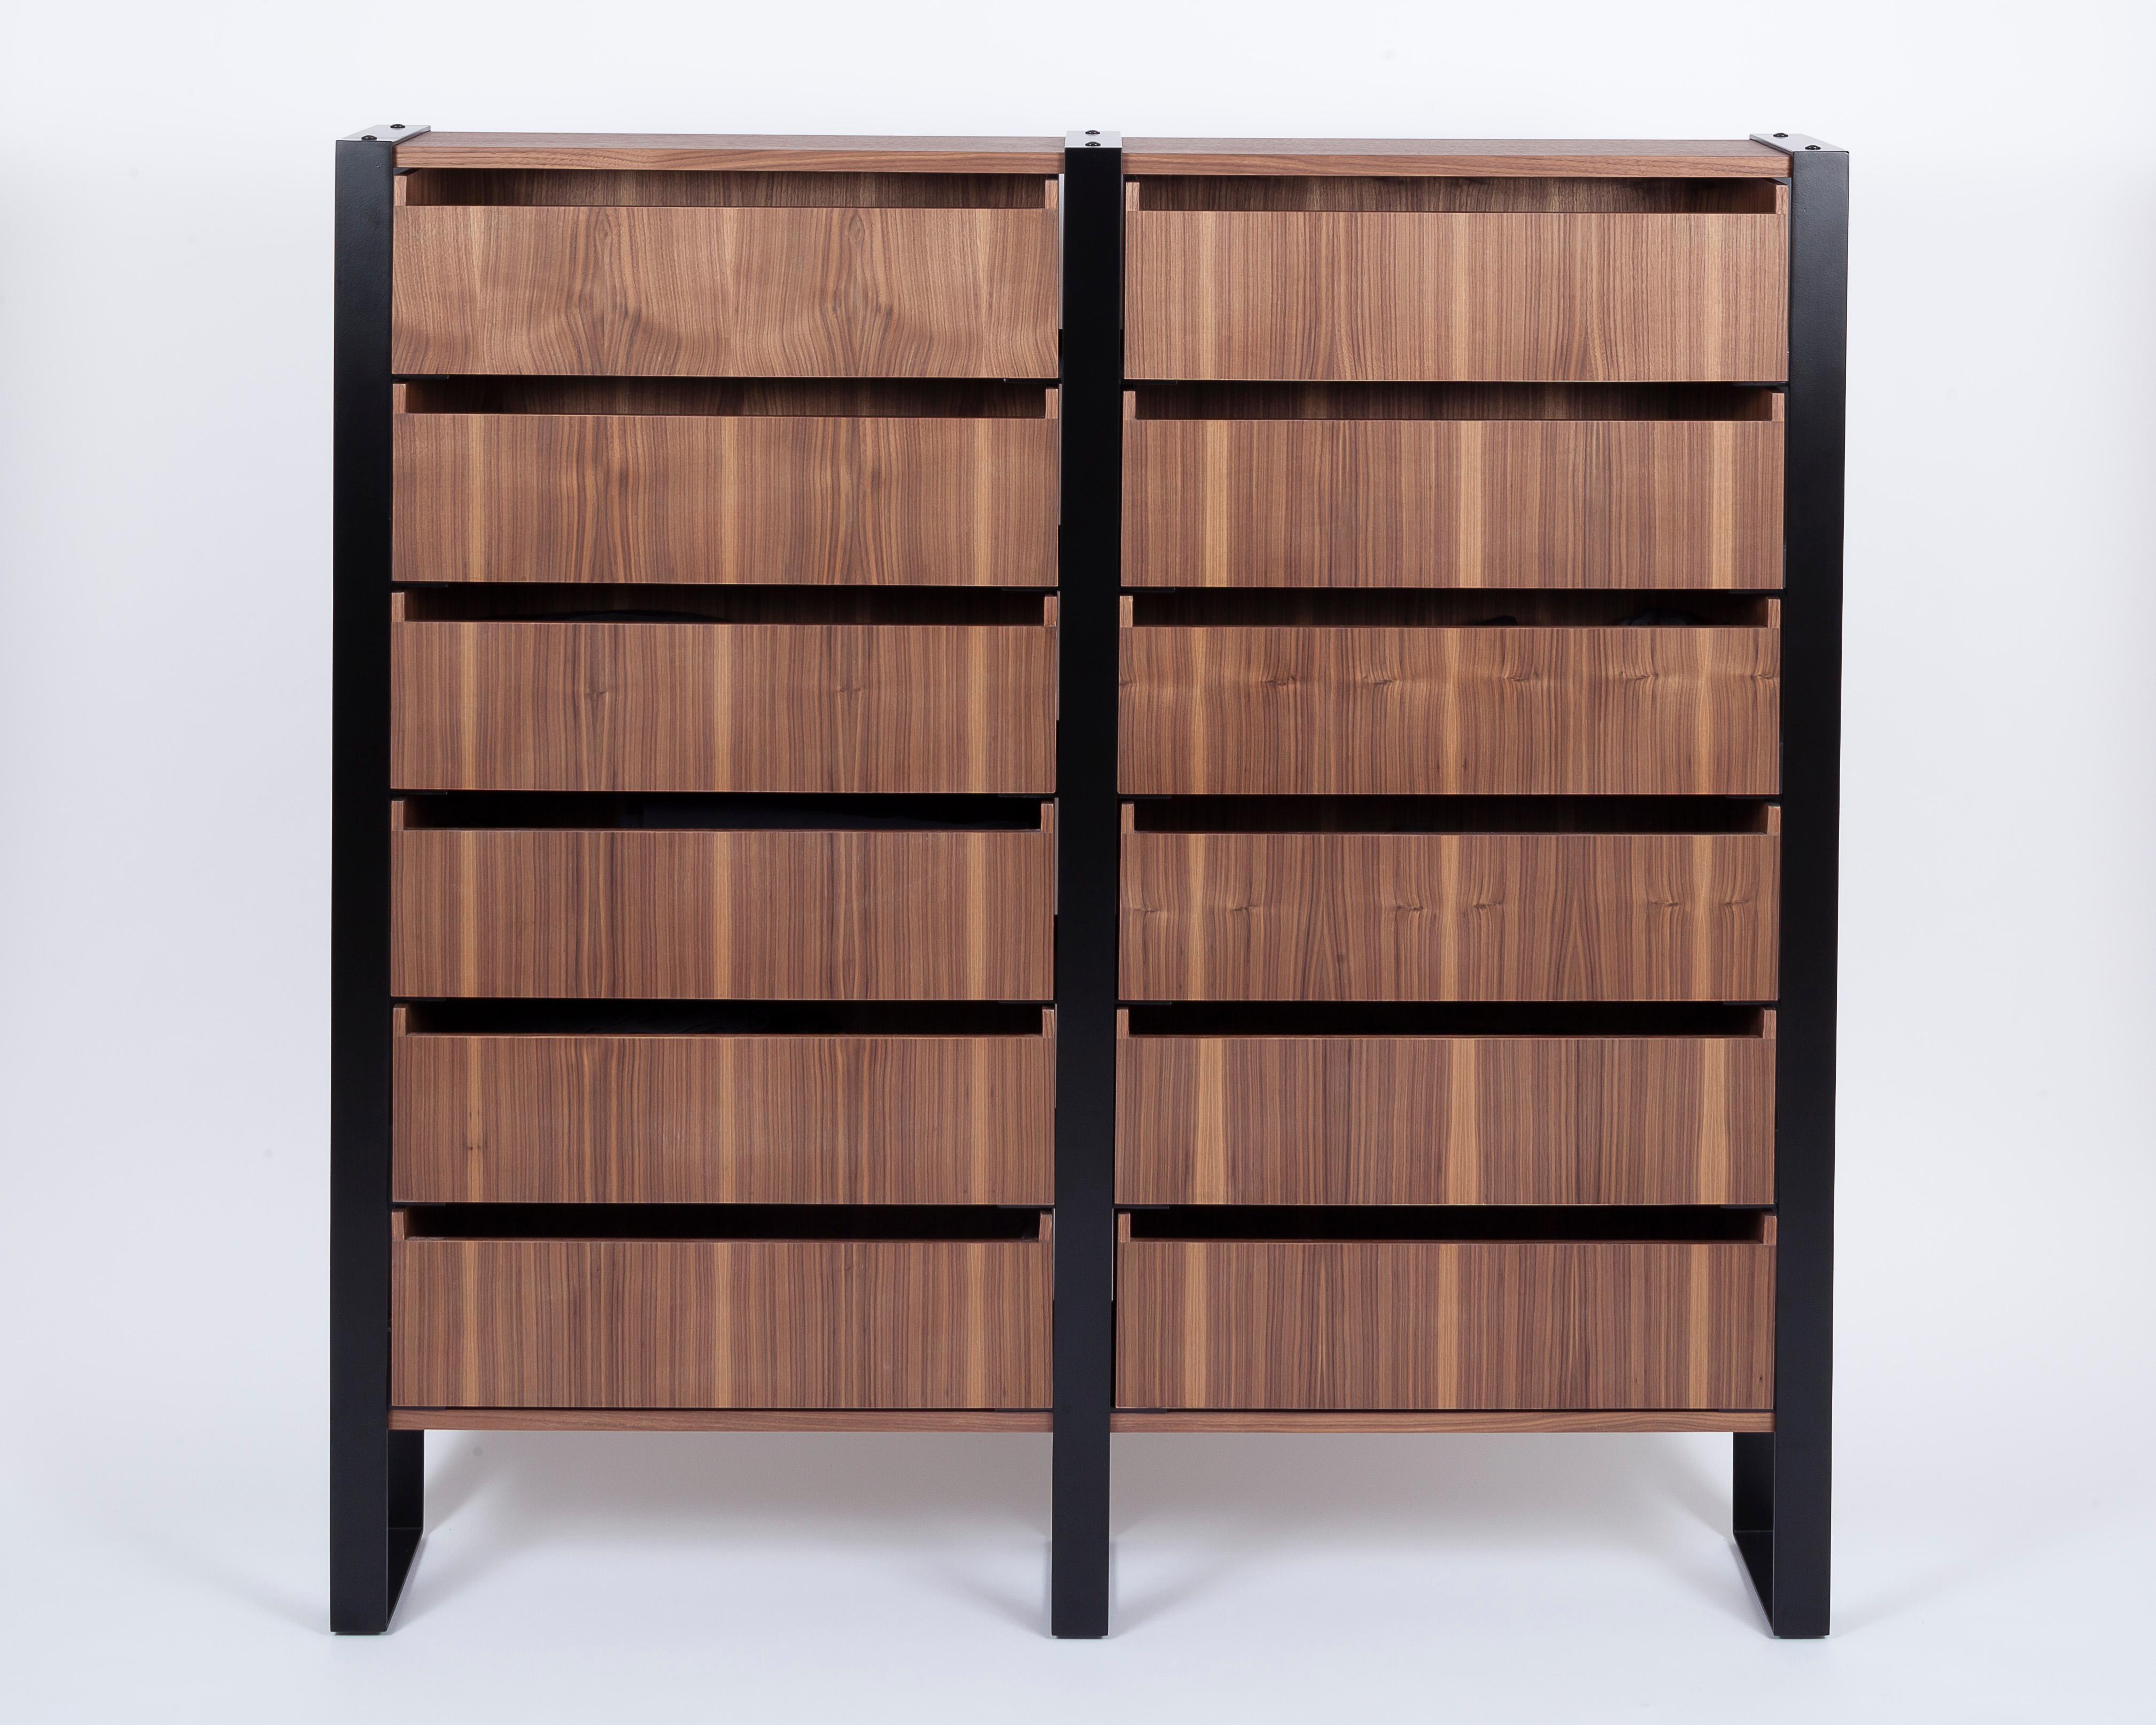 Drawers veneered with real wood and assembled by hand, frame in CRS steel, hand welded and polished, the Severin Chest stands out with its high end materials and fine crafting. Slim (only 25cm deep) but wide and tall (130cm wide x 130cm tall), its